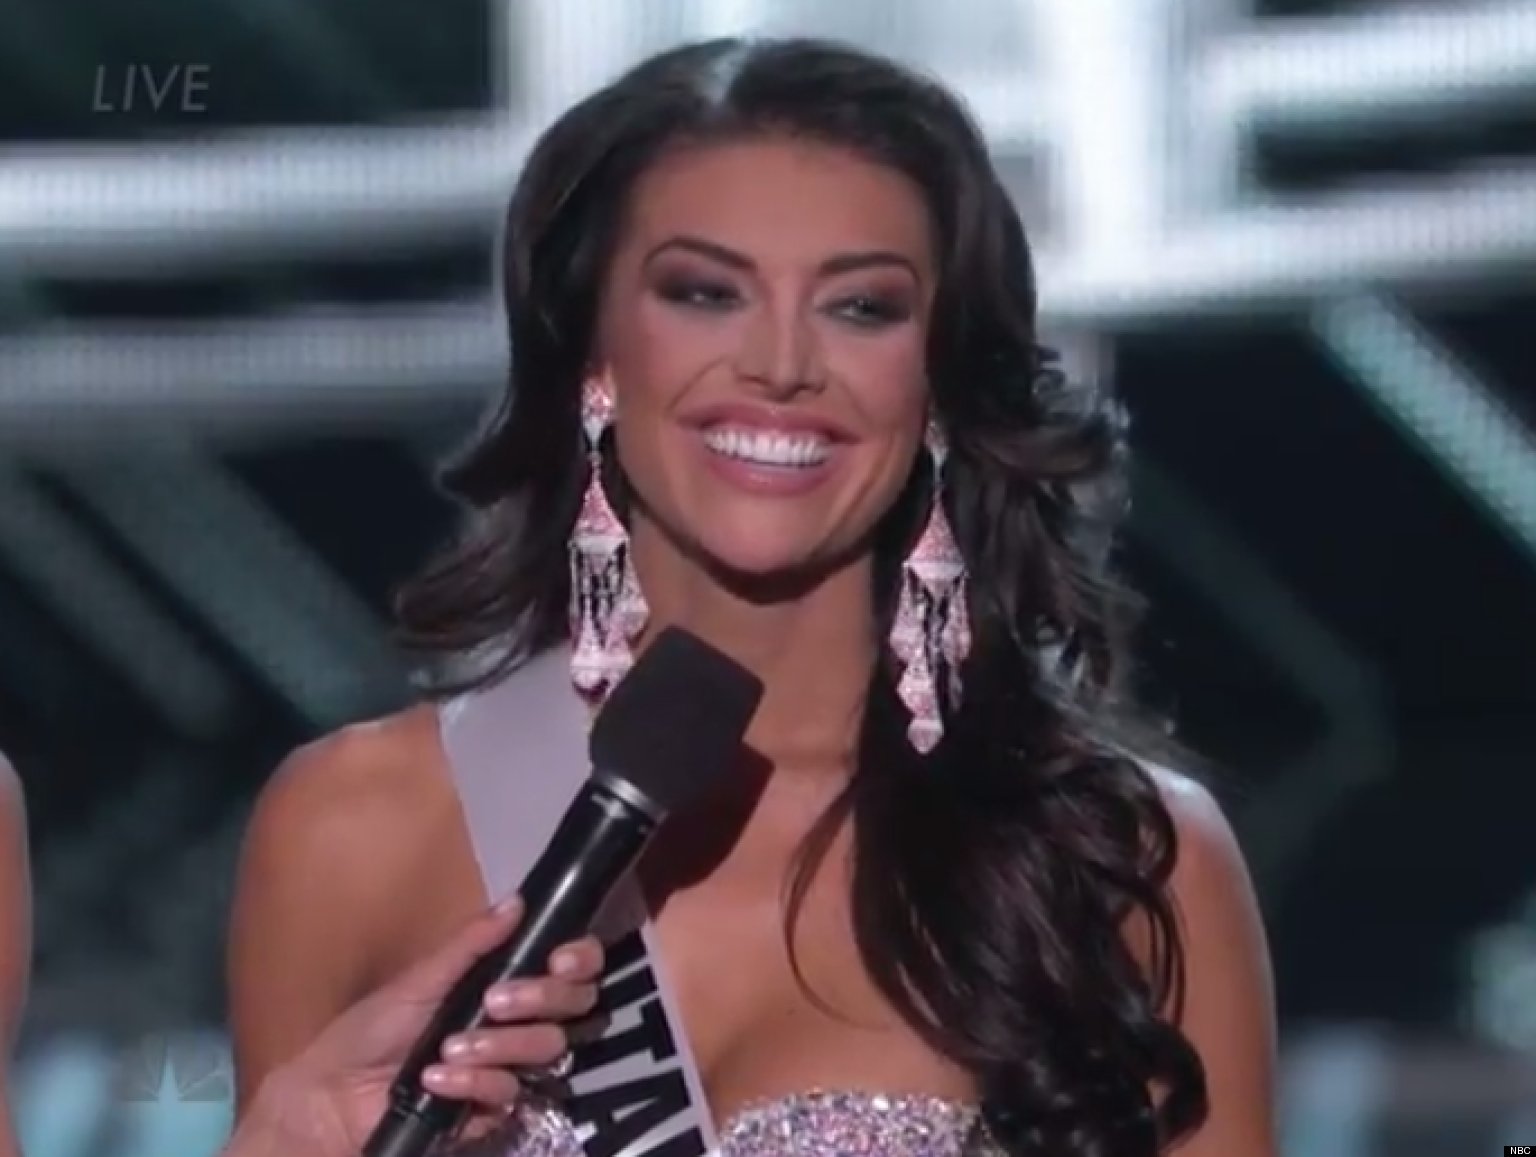 Deja Vu: The Answer Miss Utah Should Have Given.